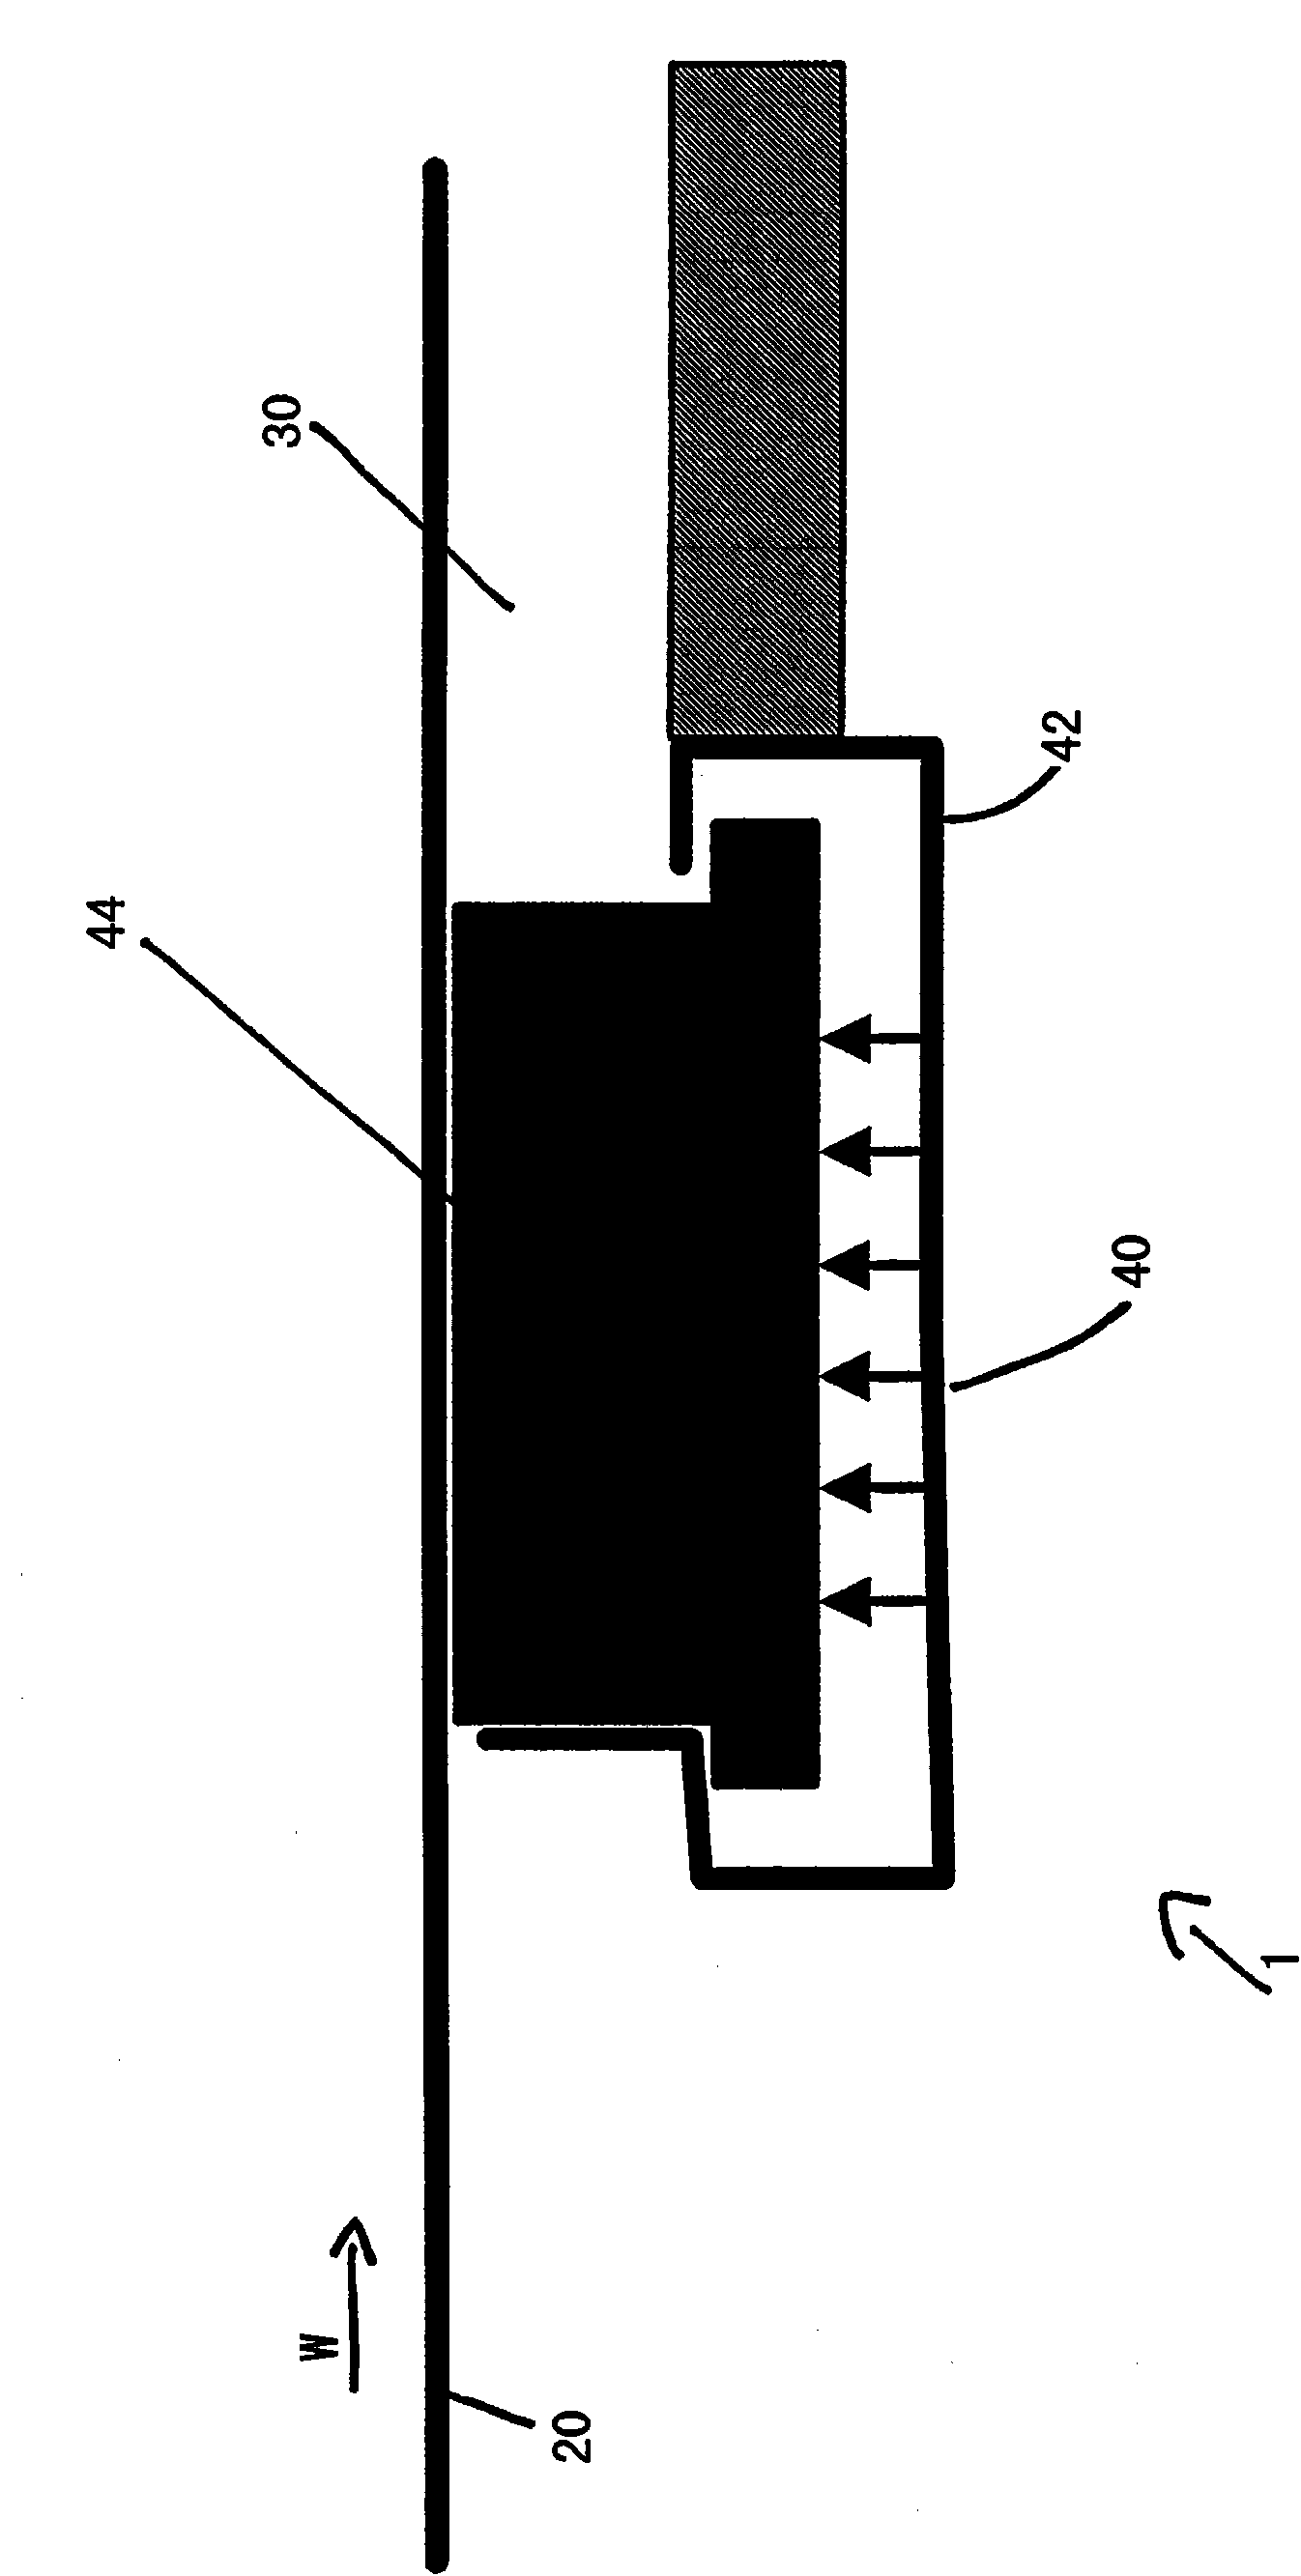 Pressing apparatus for a paper- or board-making machine for removing fluids from a web by pressing, and a method for treating a web in a paper- or board-making machine